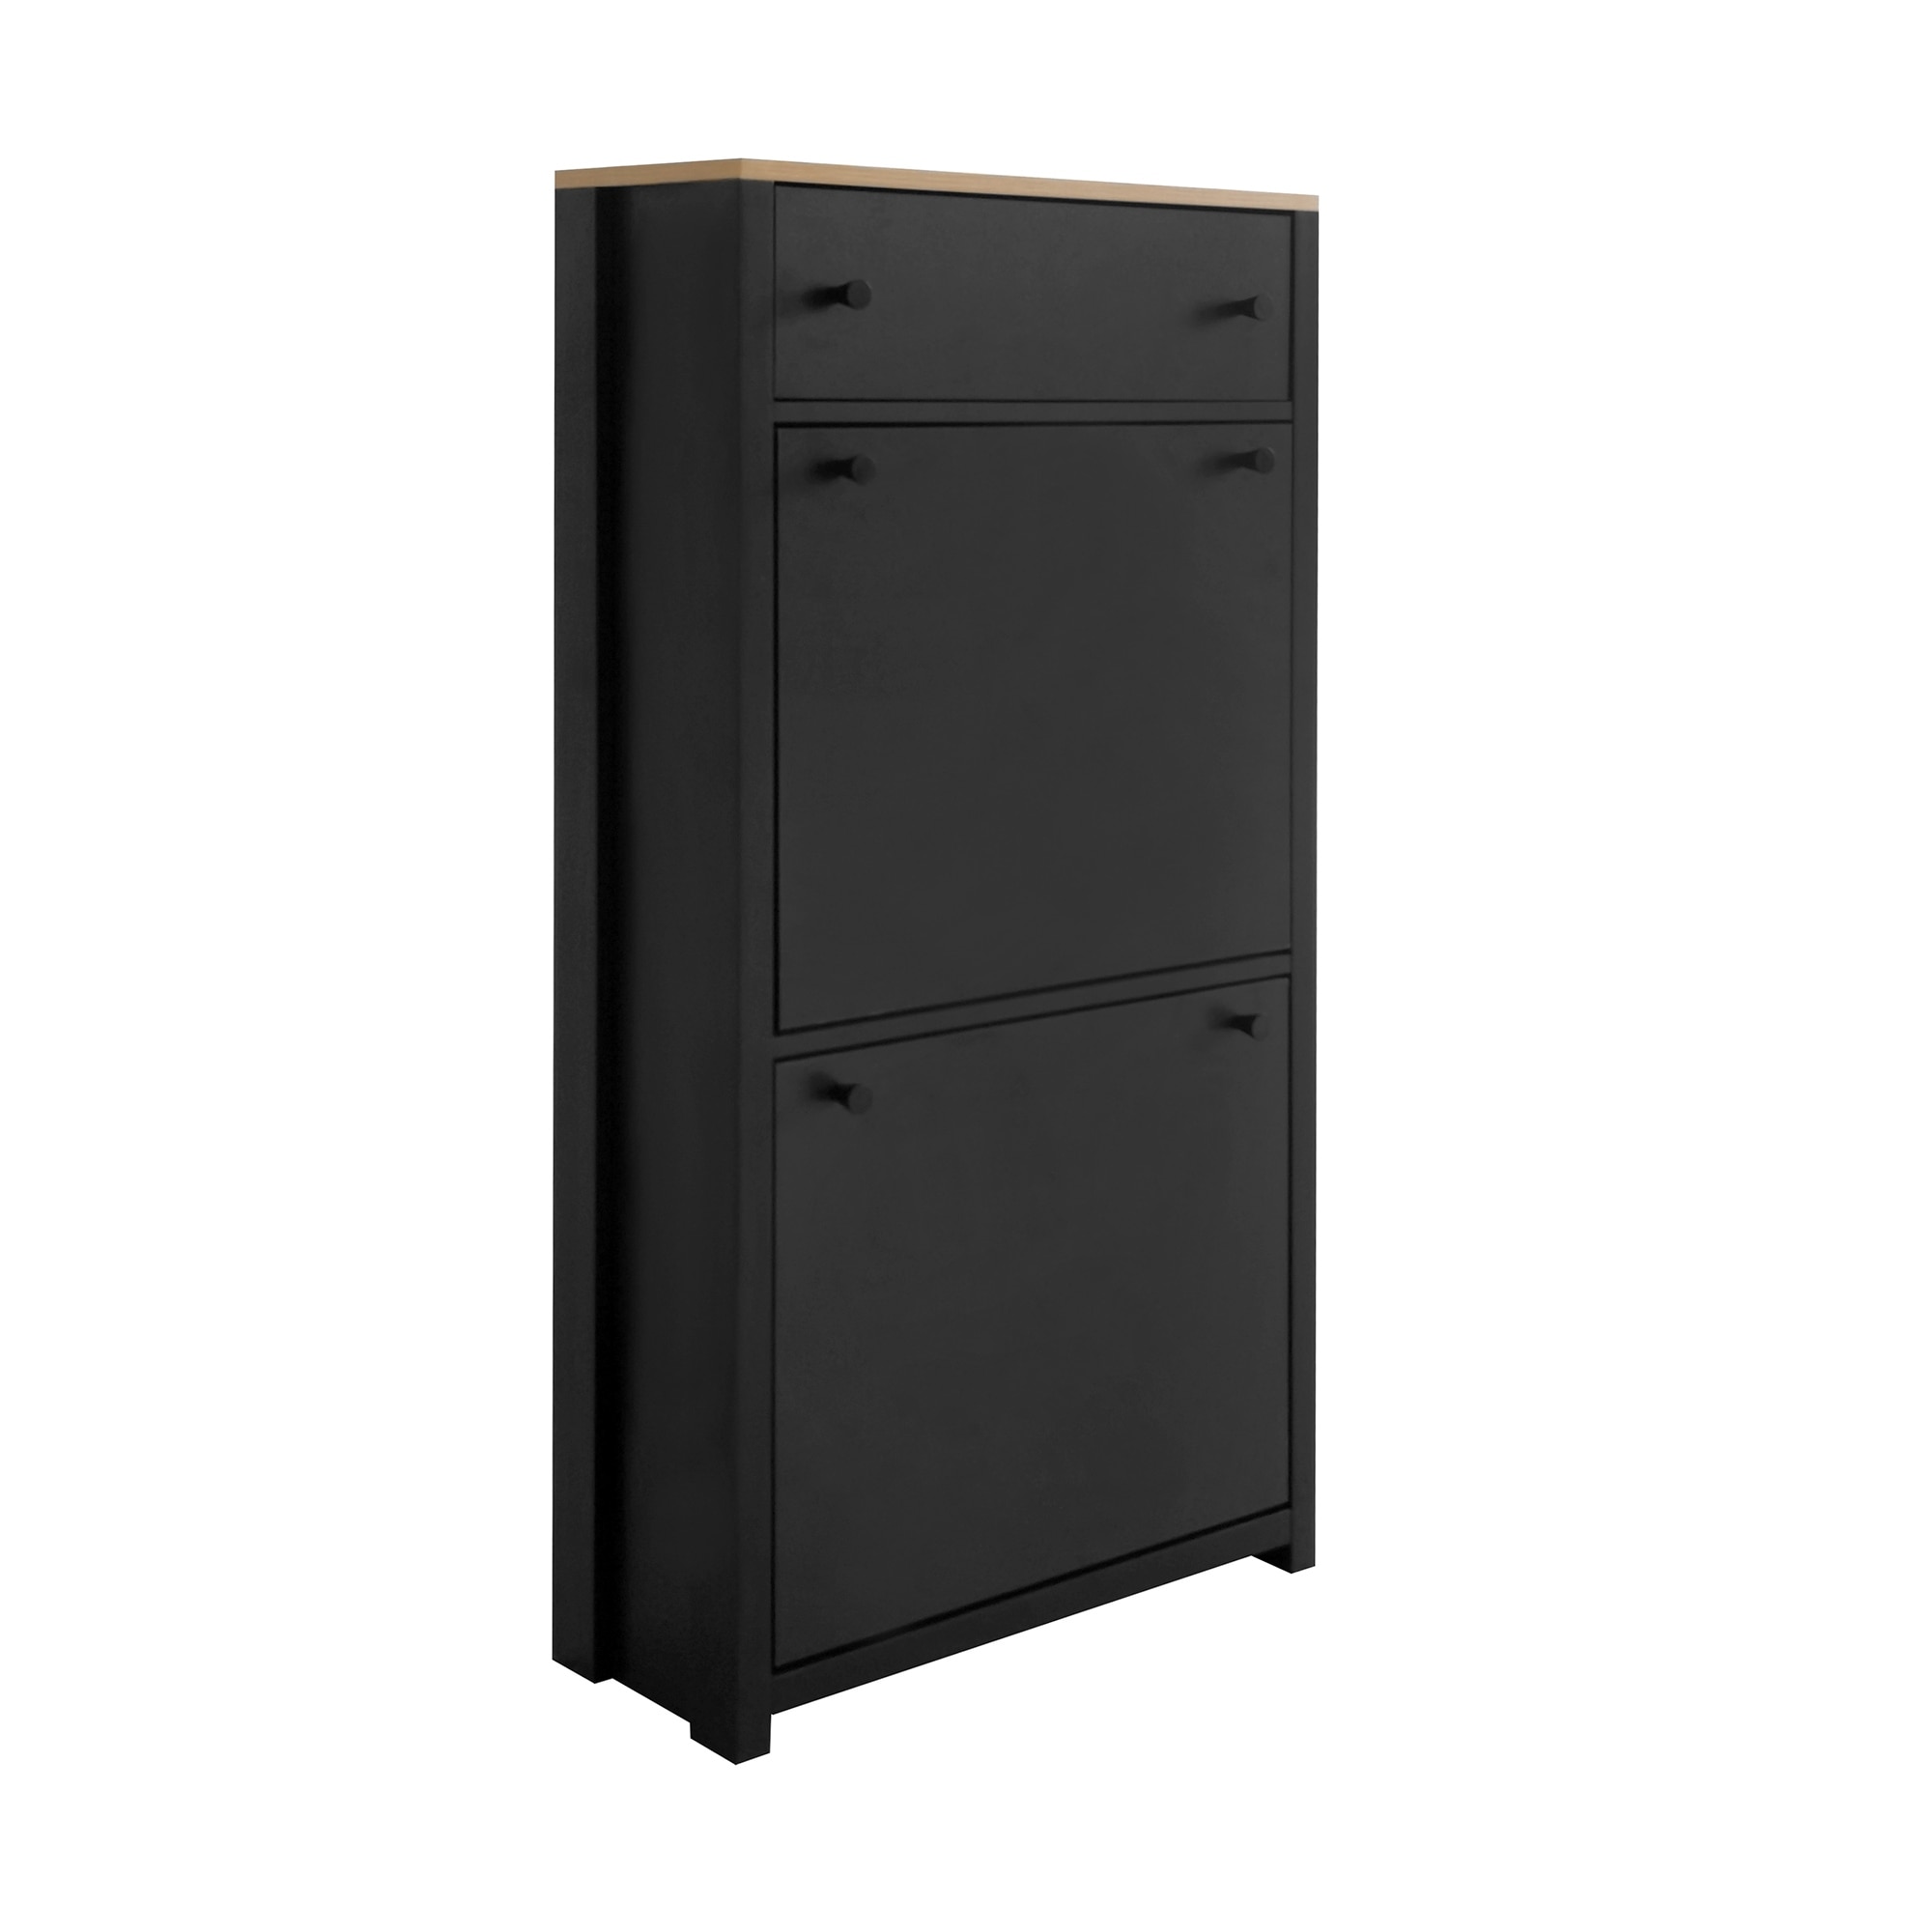 https://ak1.ostkcdn.com/images/products/is/images/direct/13e4fbc4bf52163e9c1a1f280b0476b7c2a33766/Shoe-Cabinet-with-4-Flip-Drawers%2C-Entryway-Shoe-Storage-Cabinet-with-Adjustable-Panel%2C-Free-Standing-Shoe-Rack-Storage-Organizer.jpg